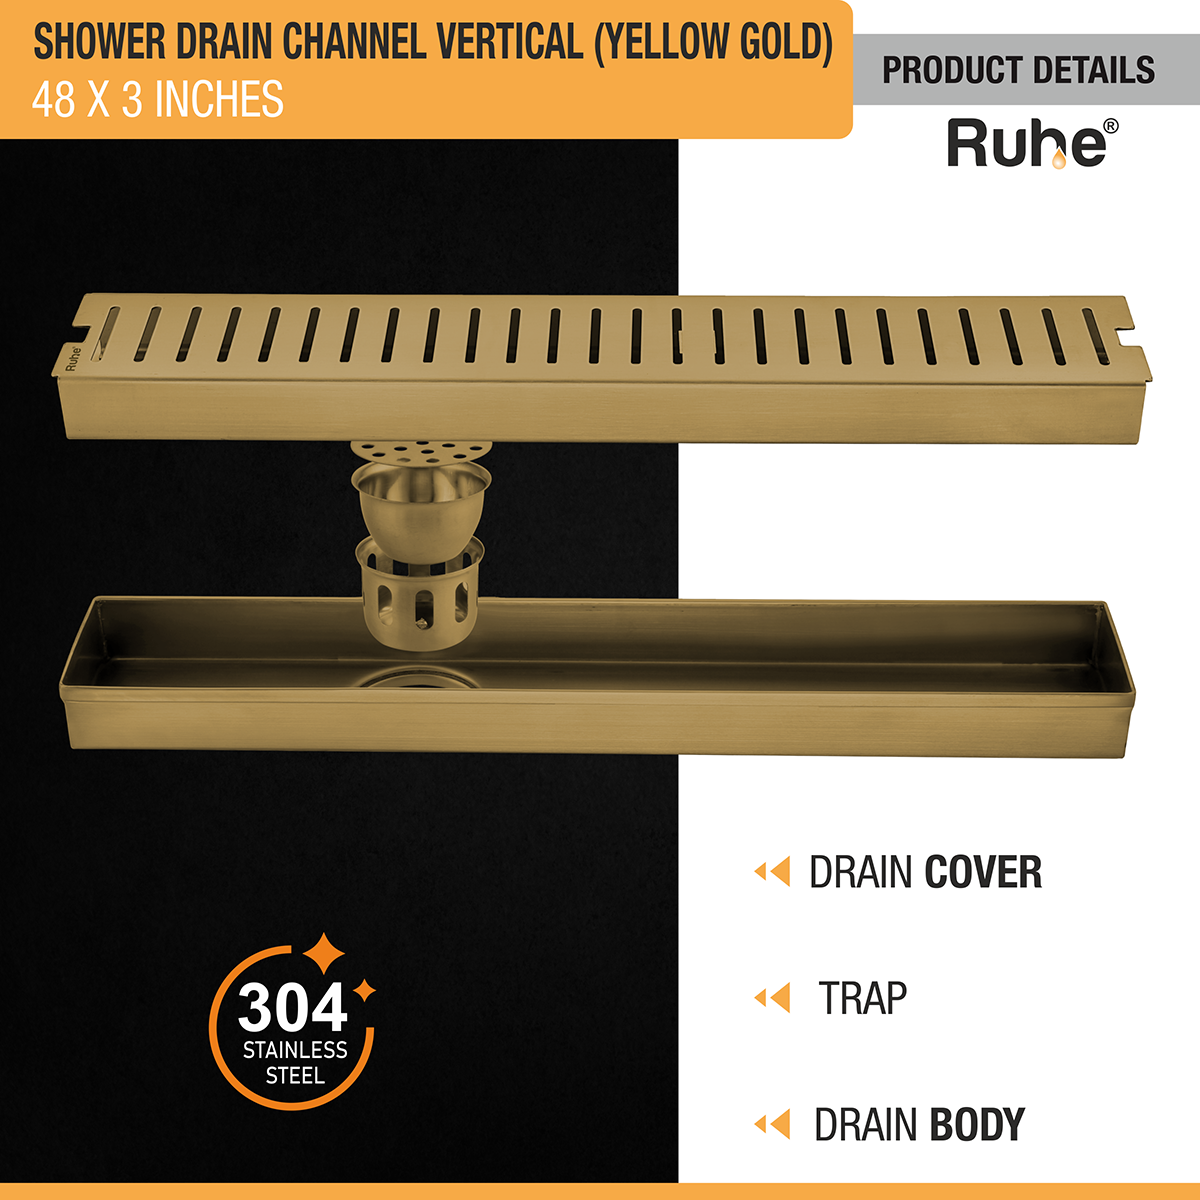 Vertical Shower Drain Channel (48 x 3 Inches) YELLOW GOLD product details